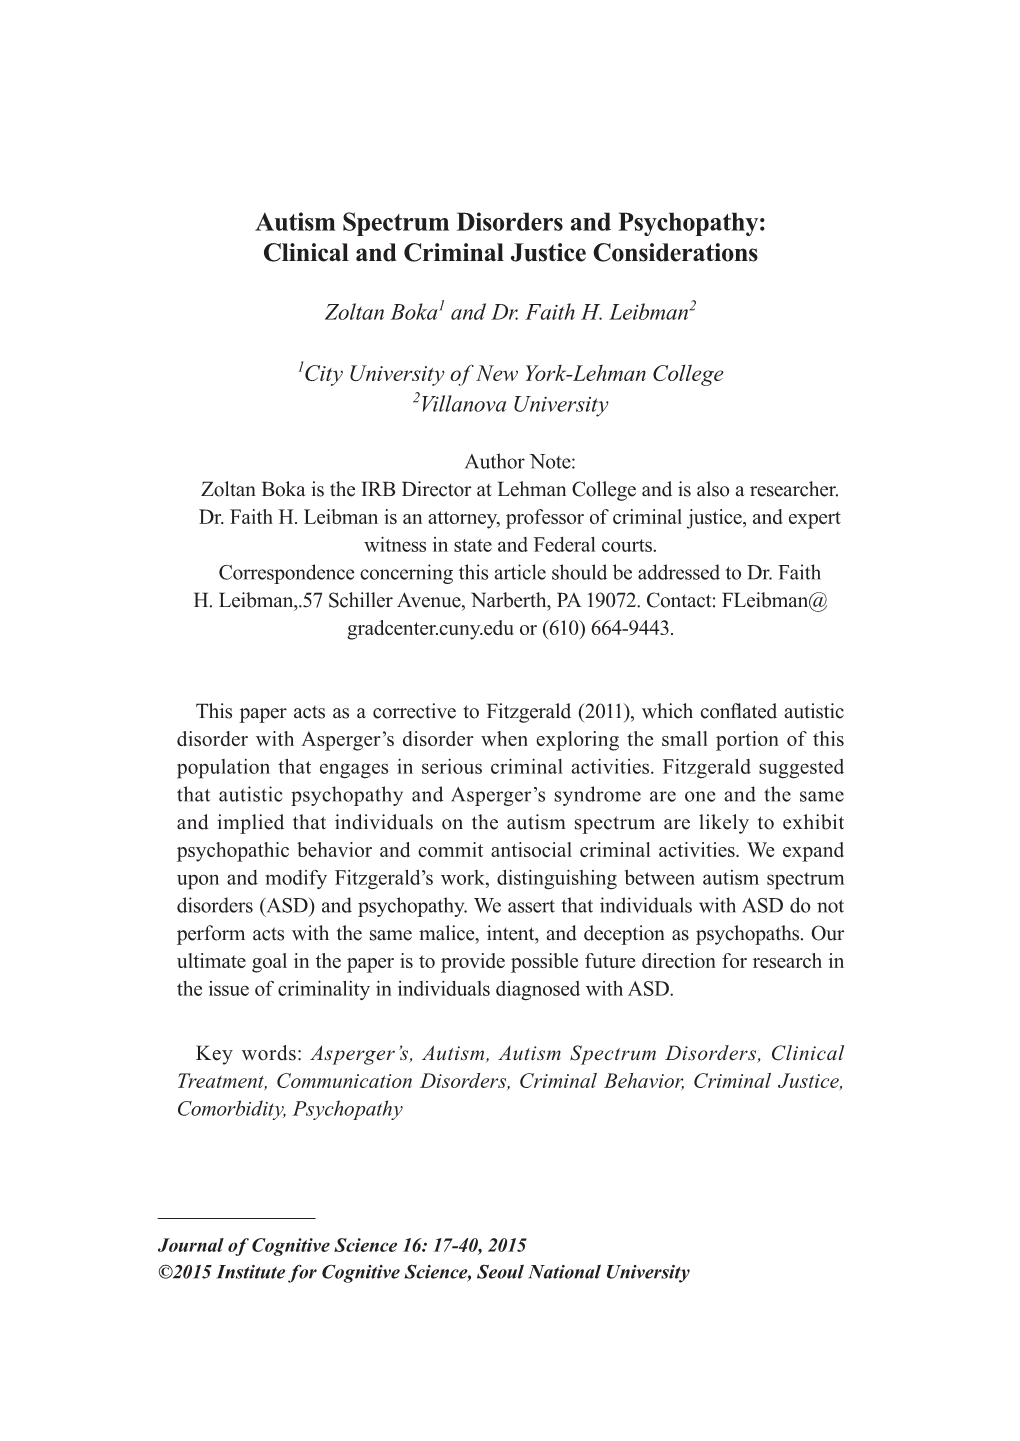 Autism Spectrum Disorders and Psychopathy: Clinical and Criminal Justice Considerations